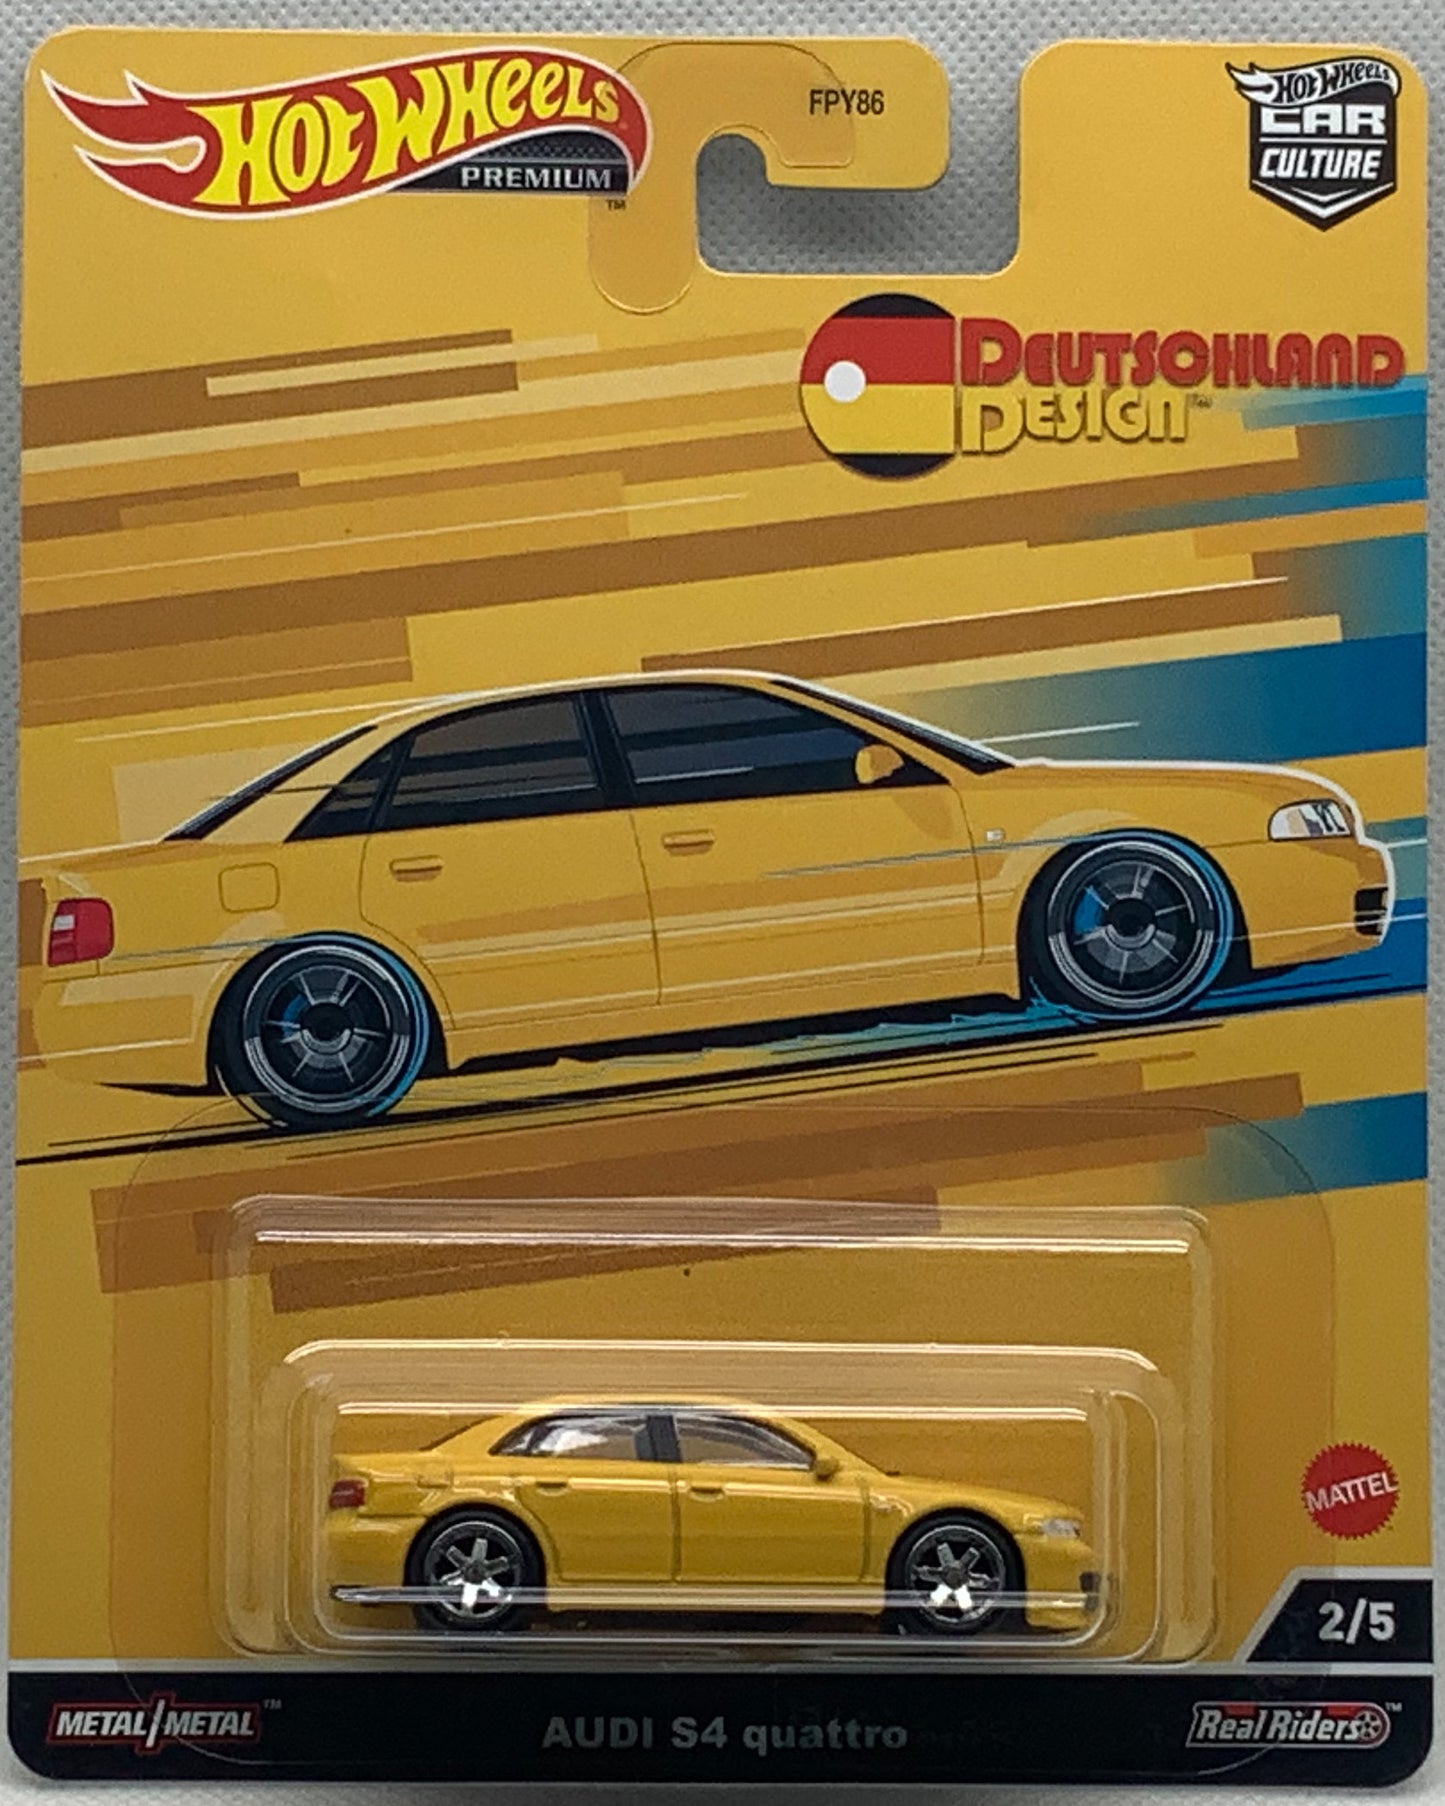 Buy at Tatoy Hot Wheels Car Culture Audi S4 Quattro 2/5 Number 2 from the set of 5 Deutschland Design Series Premium Real Riders Metal Mattel FPY86 Shop Now